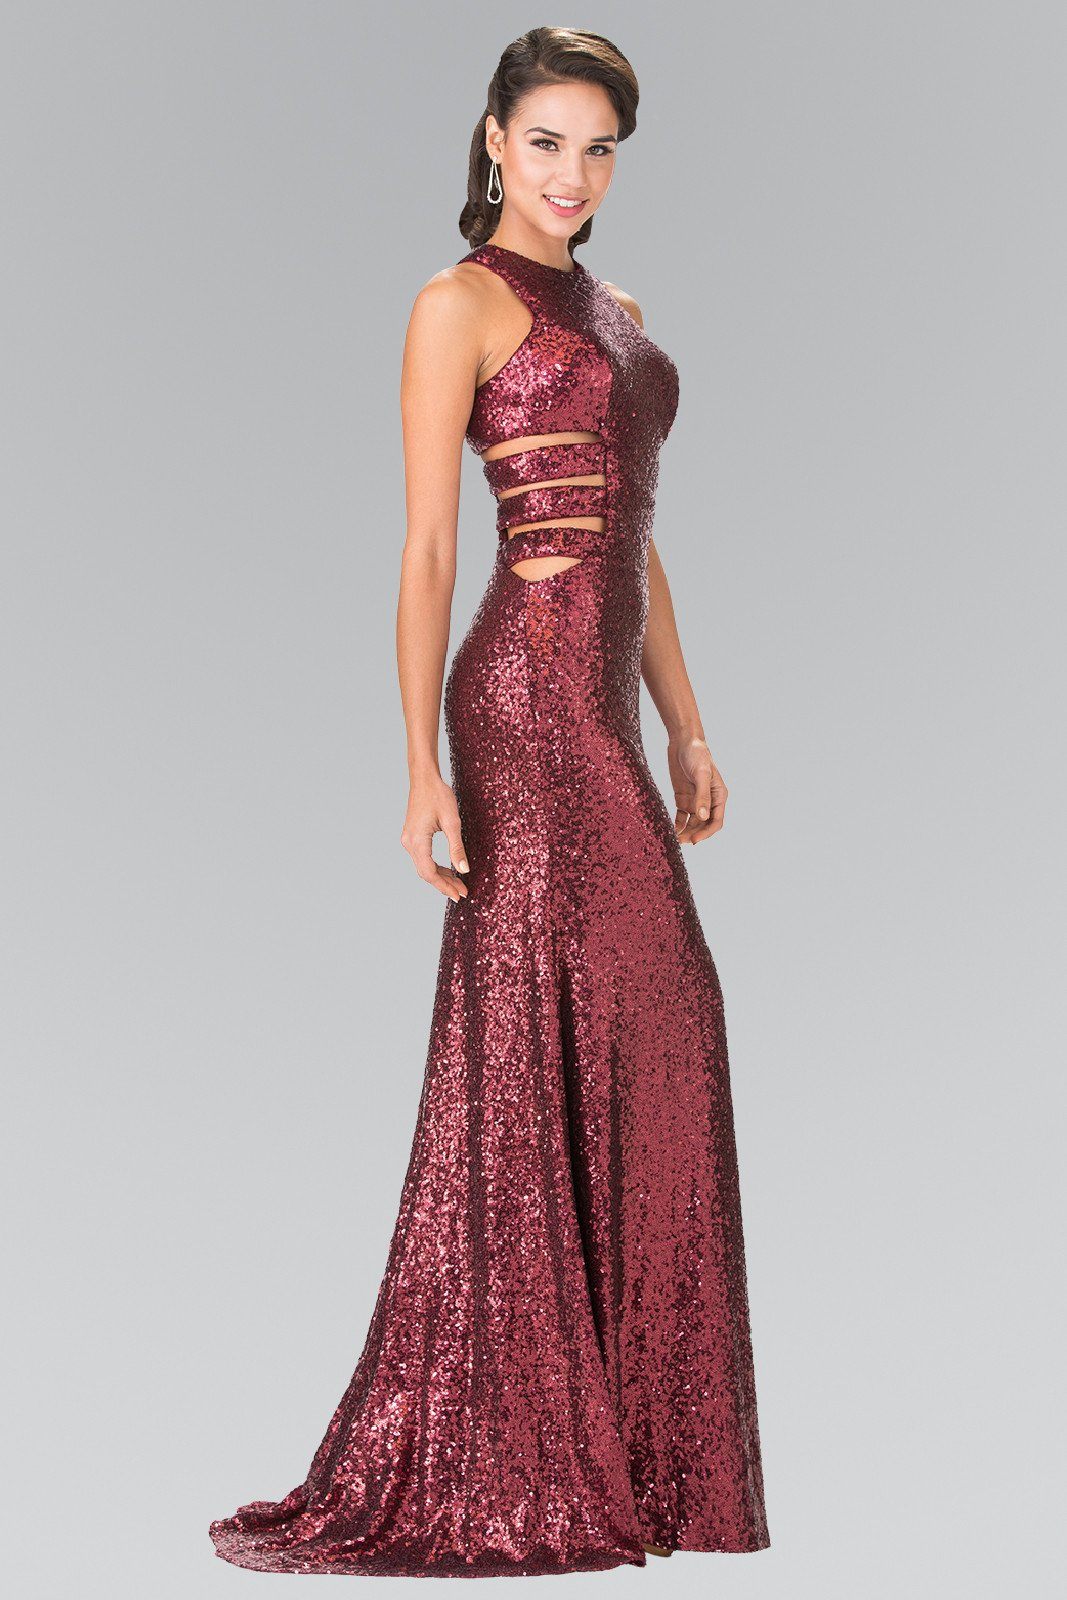 Long Sleeveless Sequined Dress with Cutouts by Elizabeth K GL2299-Long Formal Dresses-ABC Fashion